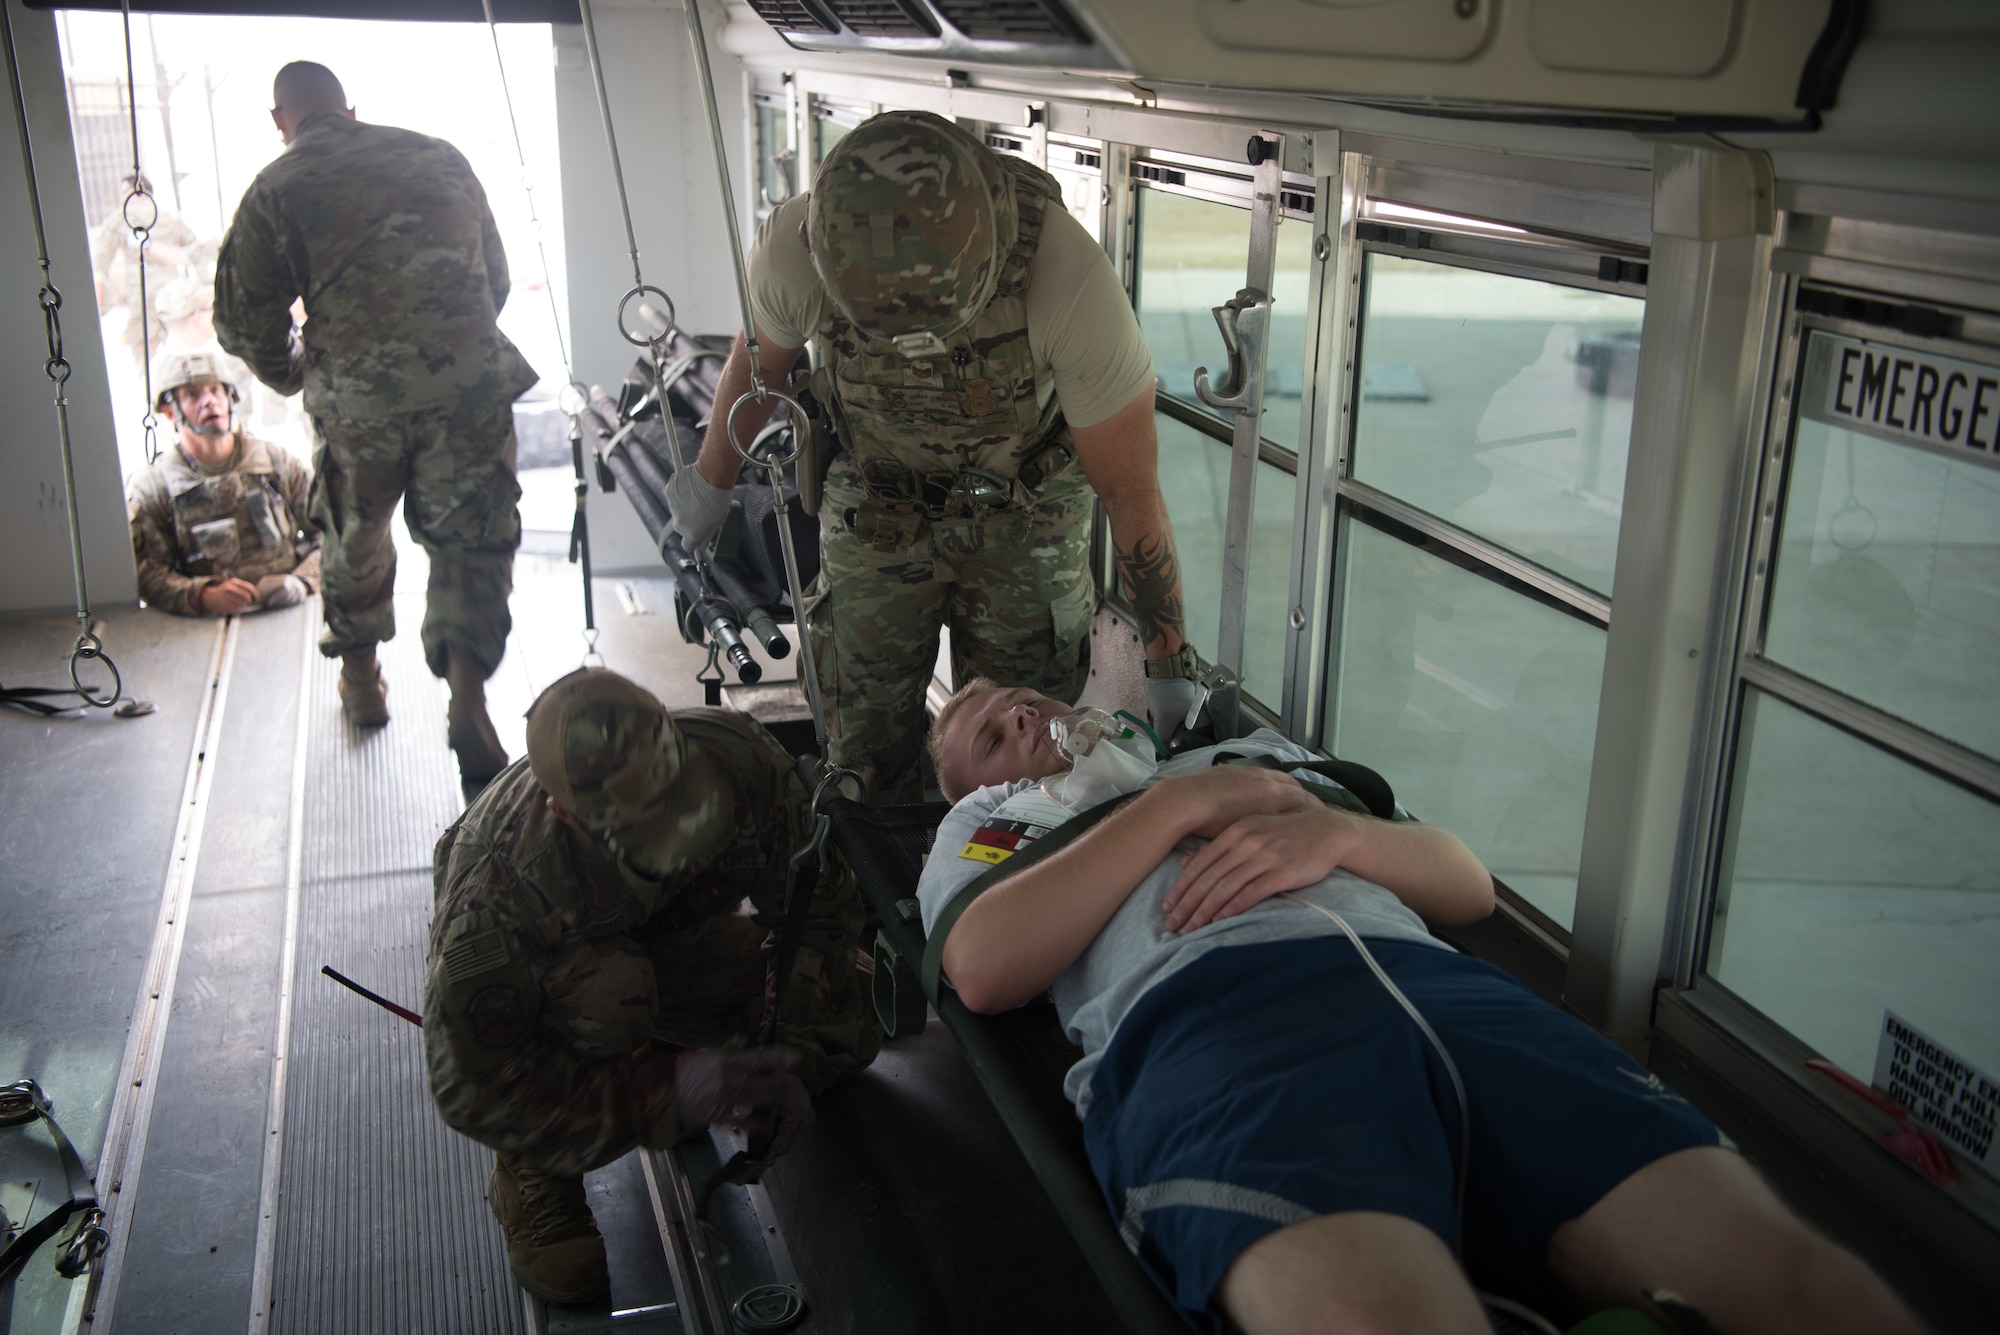 First responders secure a simulated casualty in a medical transportation bus during an exercise Sept. 24, 2019, on Al Dhafra Air Base, United Arab Emirates. The exercise showcased the readiness, knowledge of emergency procedures and interagency cooperation amongst the wing’s first responders. (U.S. Air Force photo by Tech. Sgt. Jocelyn A. Ford)